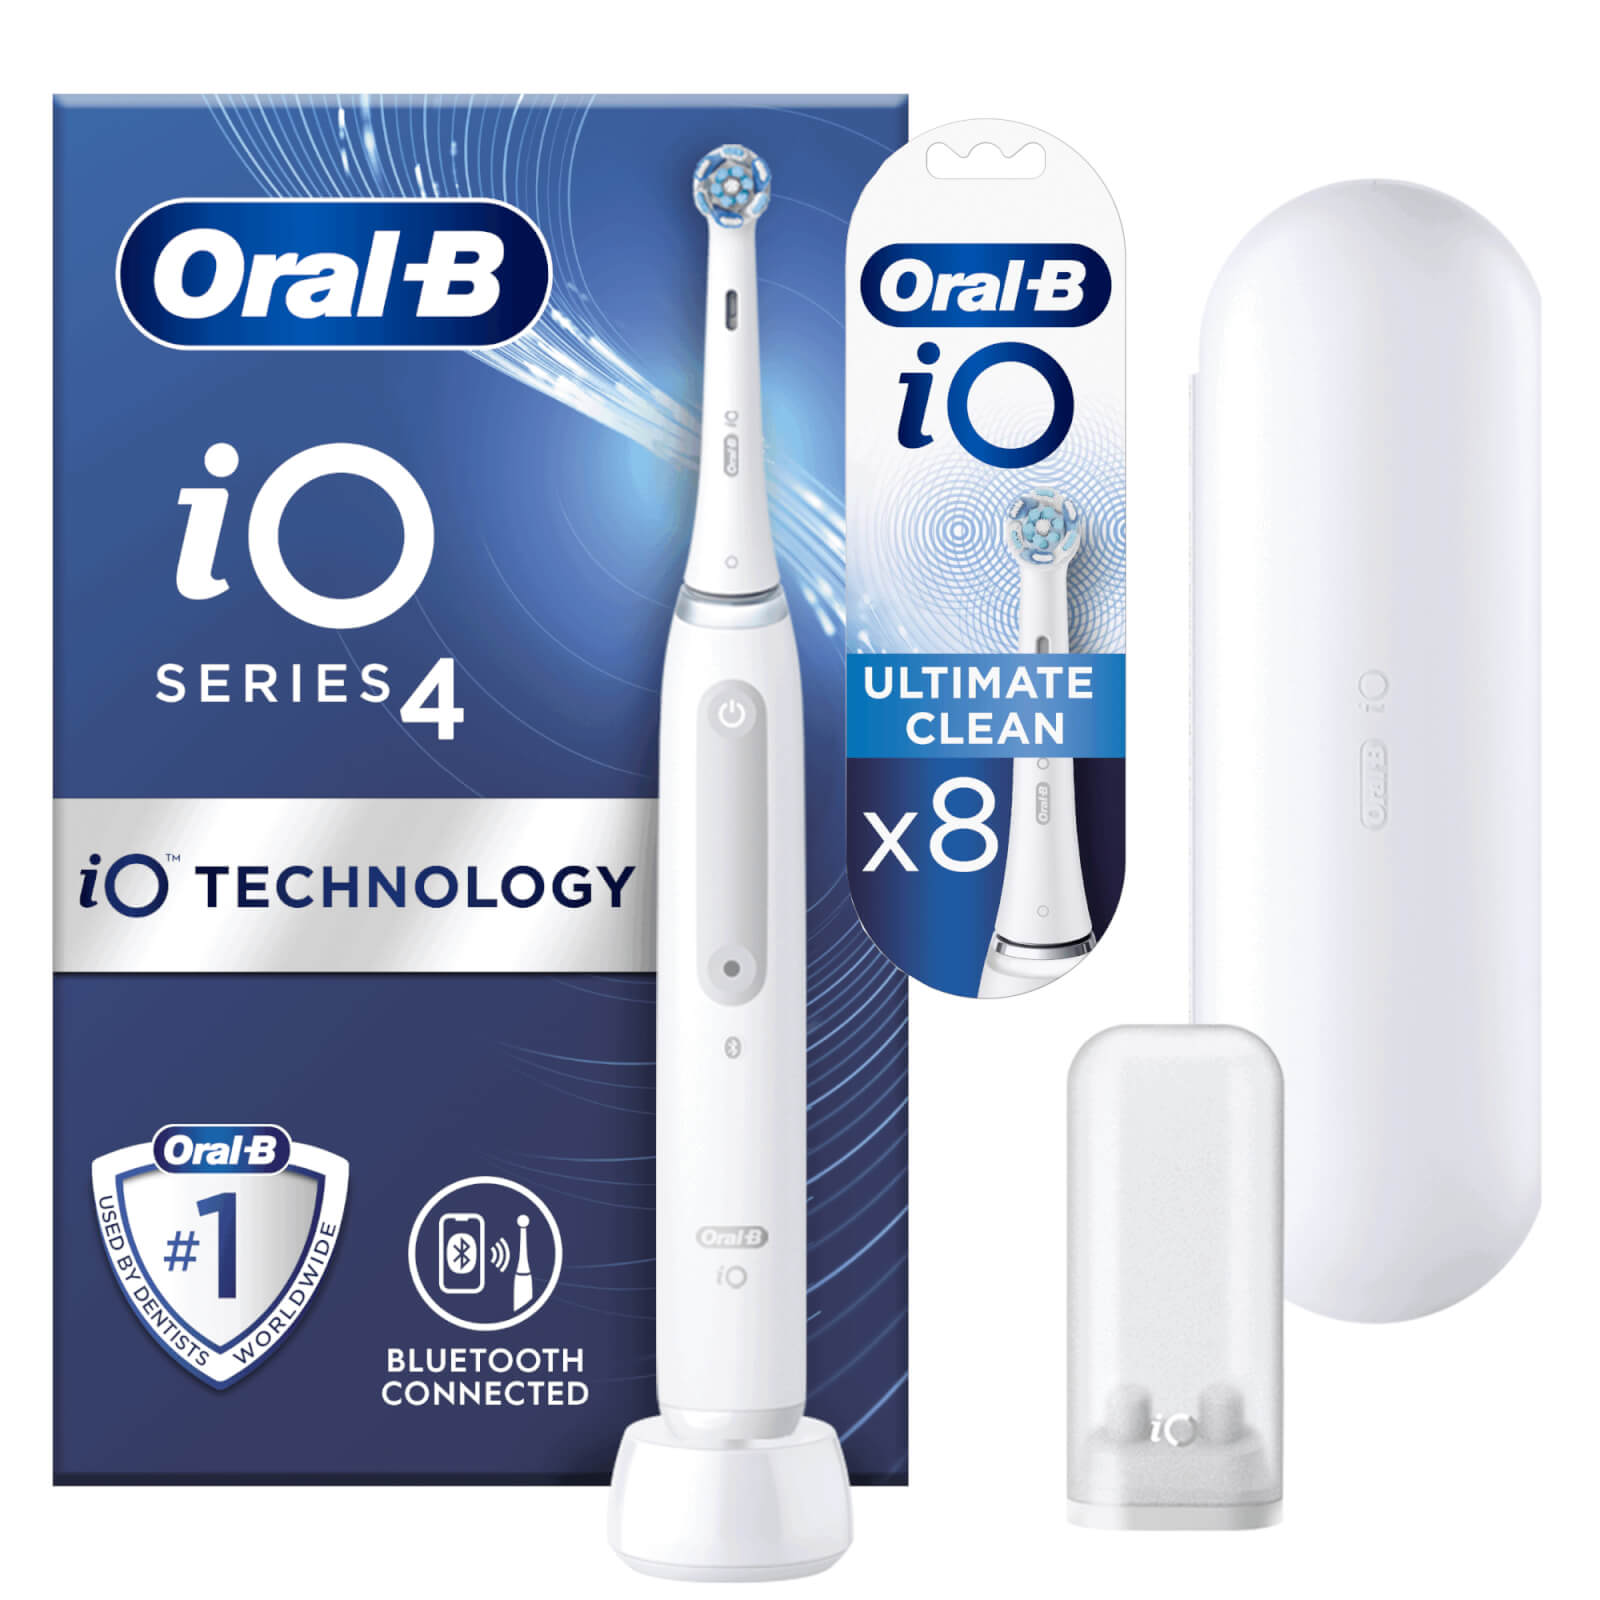 Oral-B iO4 White Electric Toothbrush with Travel Case - Toothbrush + 8 Refills